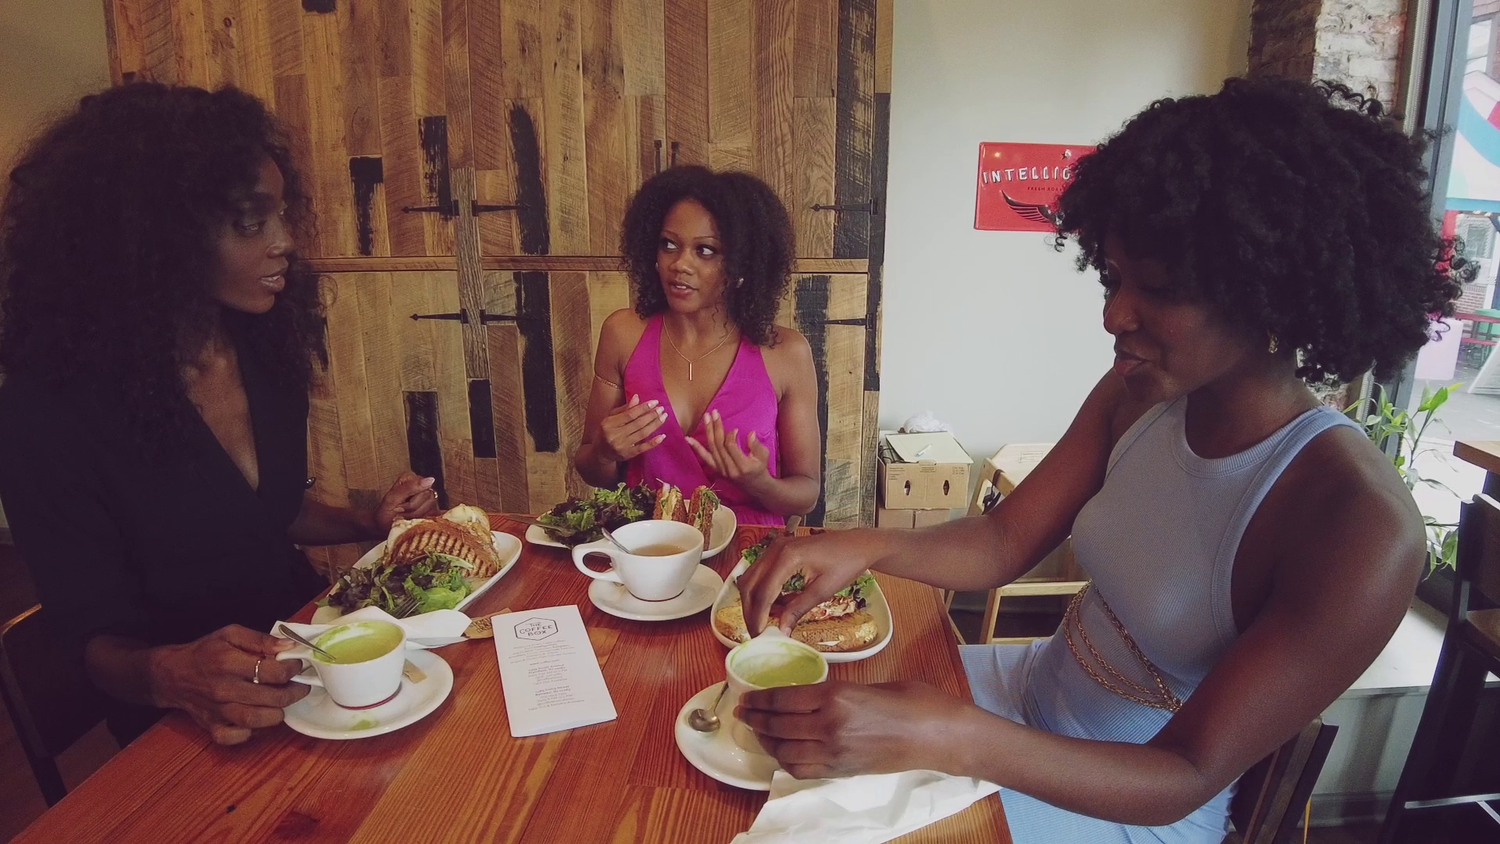 Three women eating brunch at a table